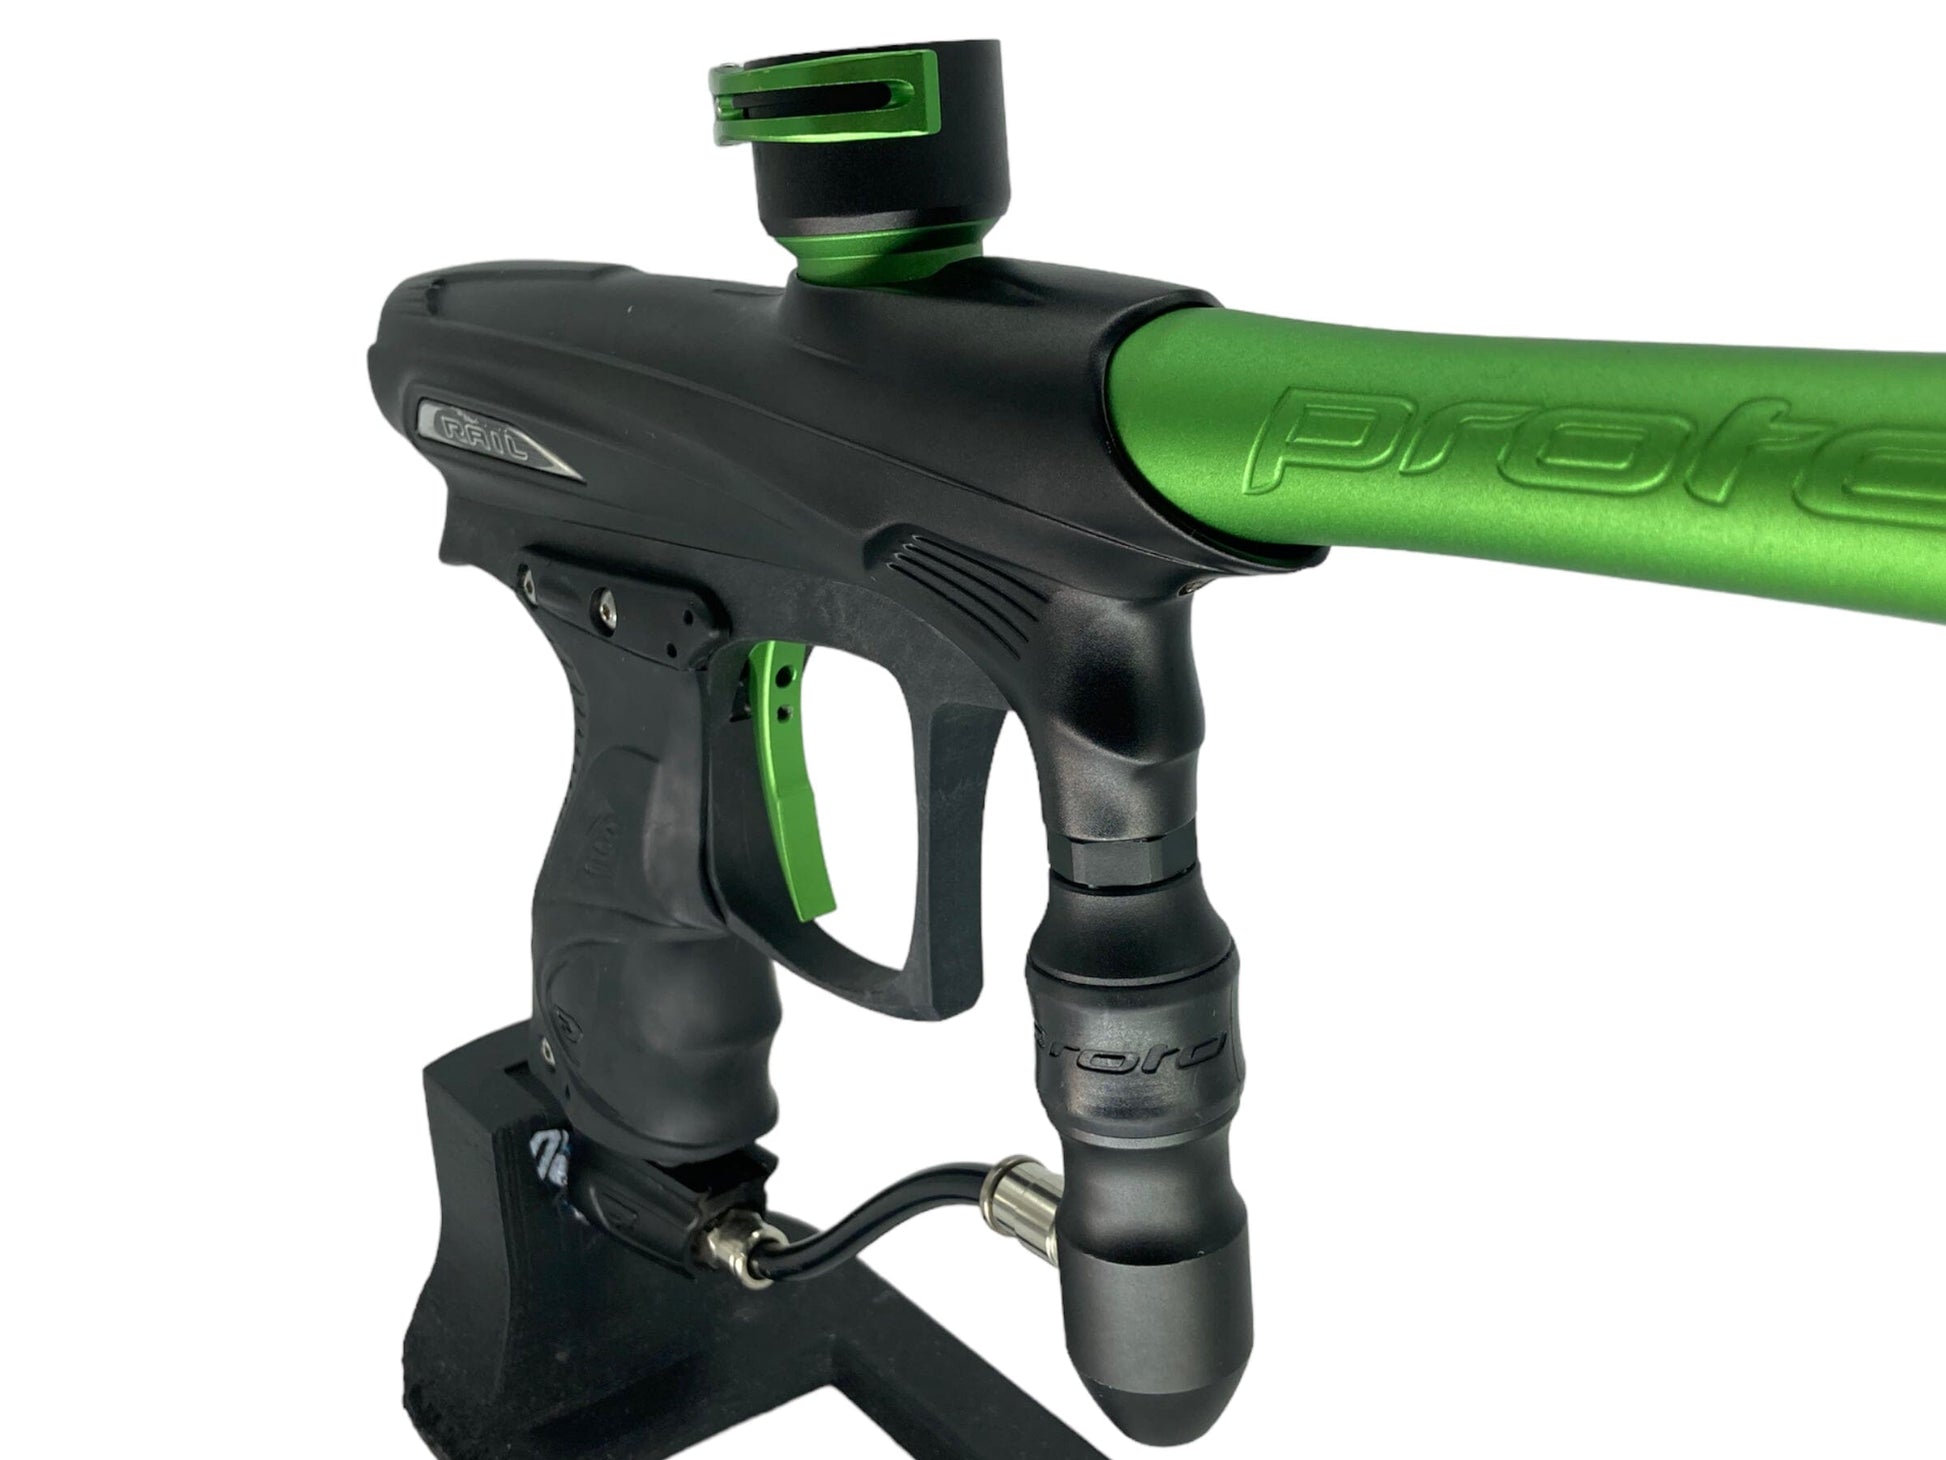 Used Dye Proto Rail Paintball Gun from CPXBrosPaintball Buy/Sell/Trade Paintball Markers, New Paintball Guns, Paintball Hoppers, Paintball Masks, and Hormesis Headbands